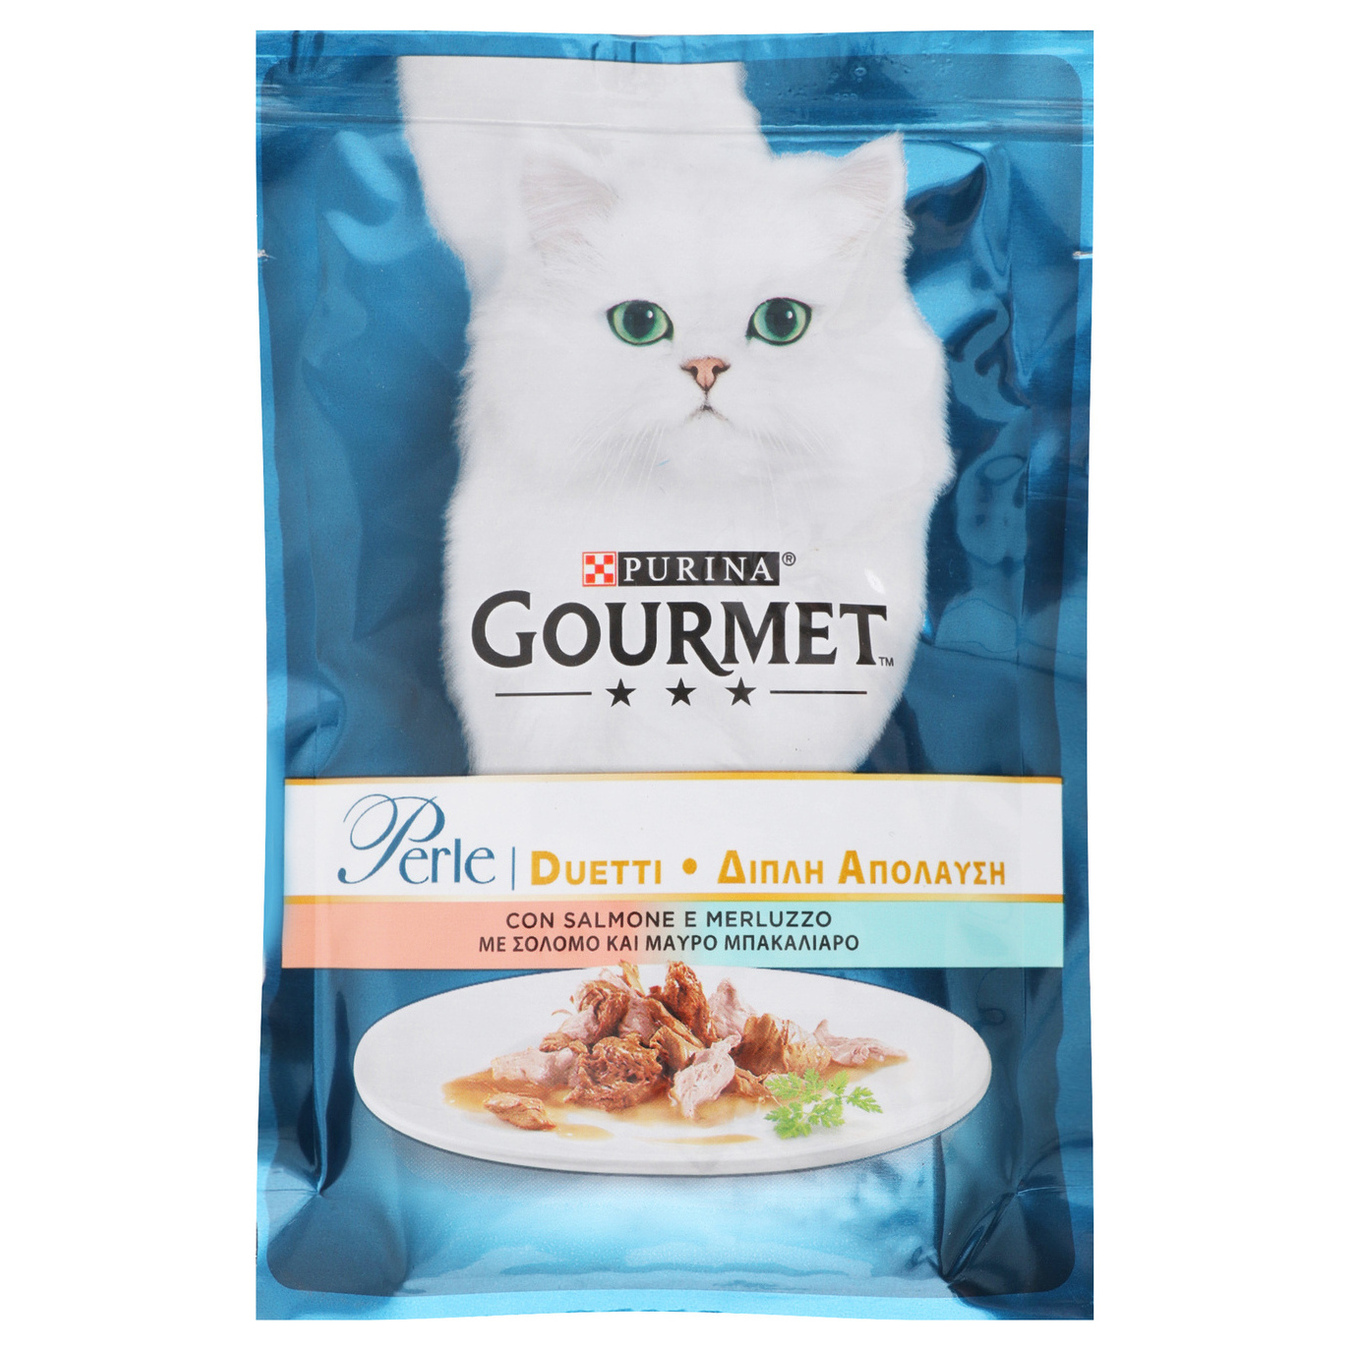 Purina Gourmet Perle Duo with salmon and pollack cat food 85g 